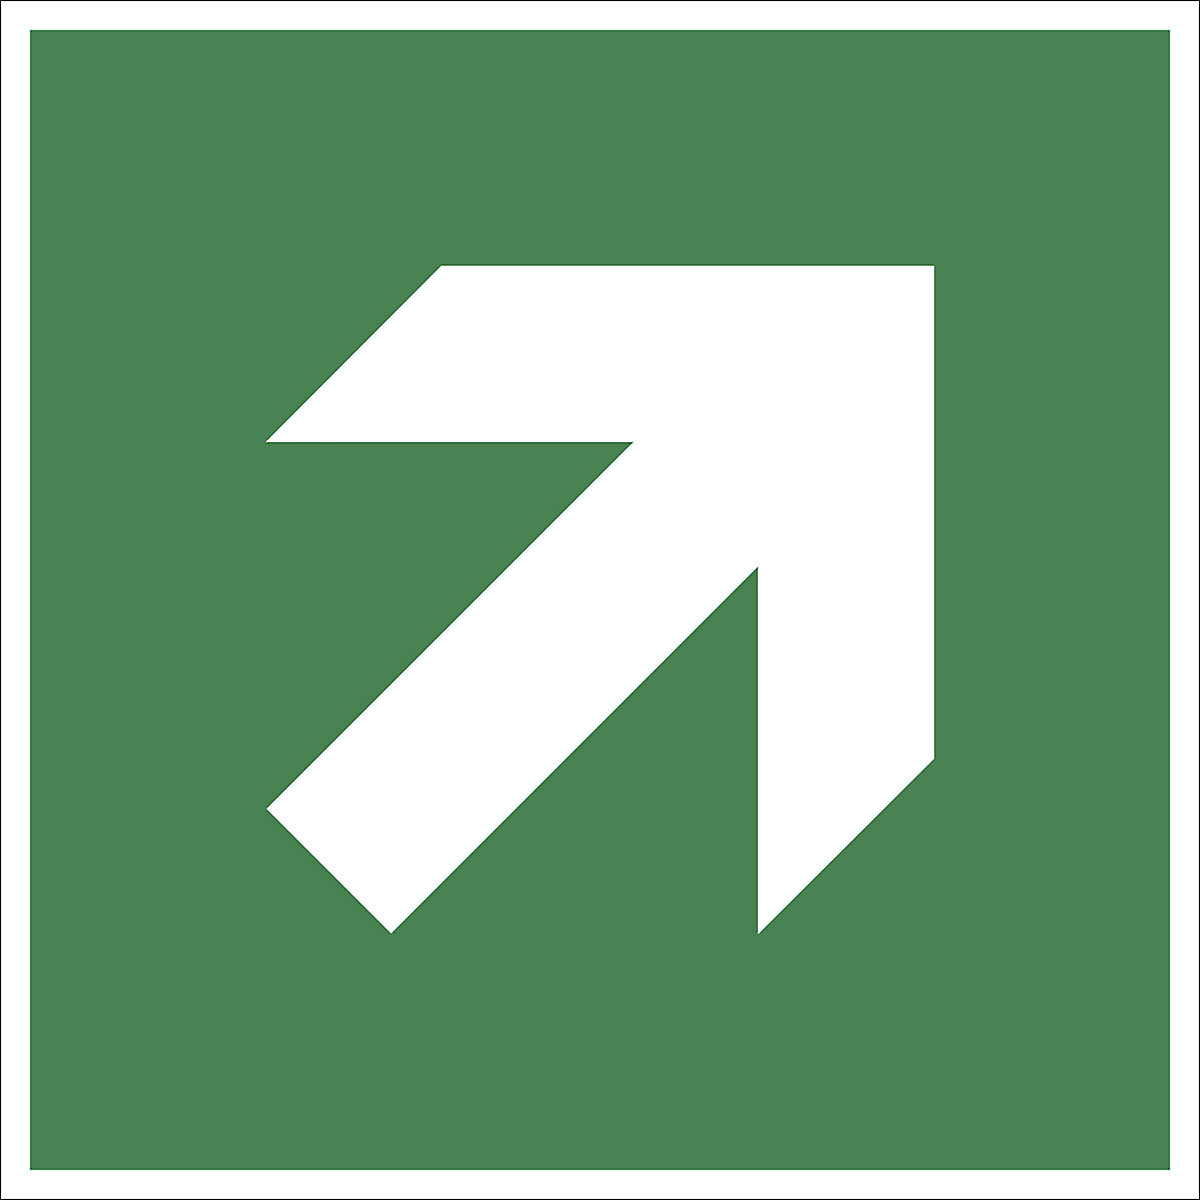 Emergency exit signs, arrow pointing diagonally, only in combination with emergency sign, pack of 10, plastic, 200 x 200 mm